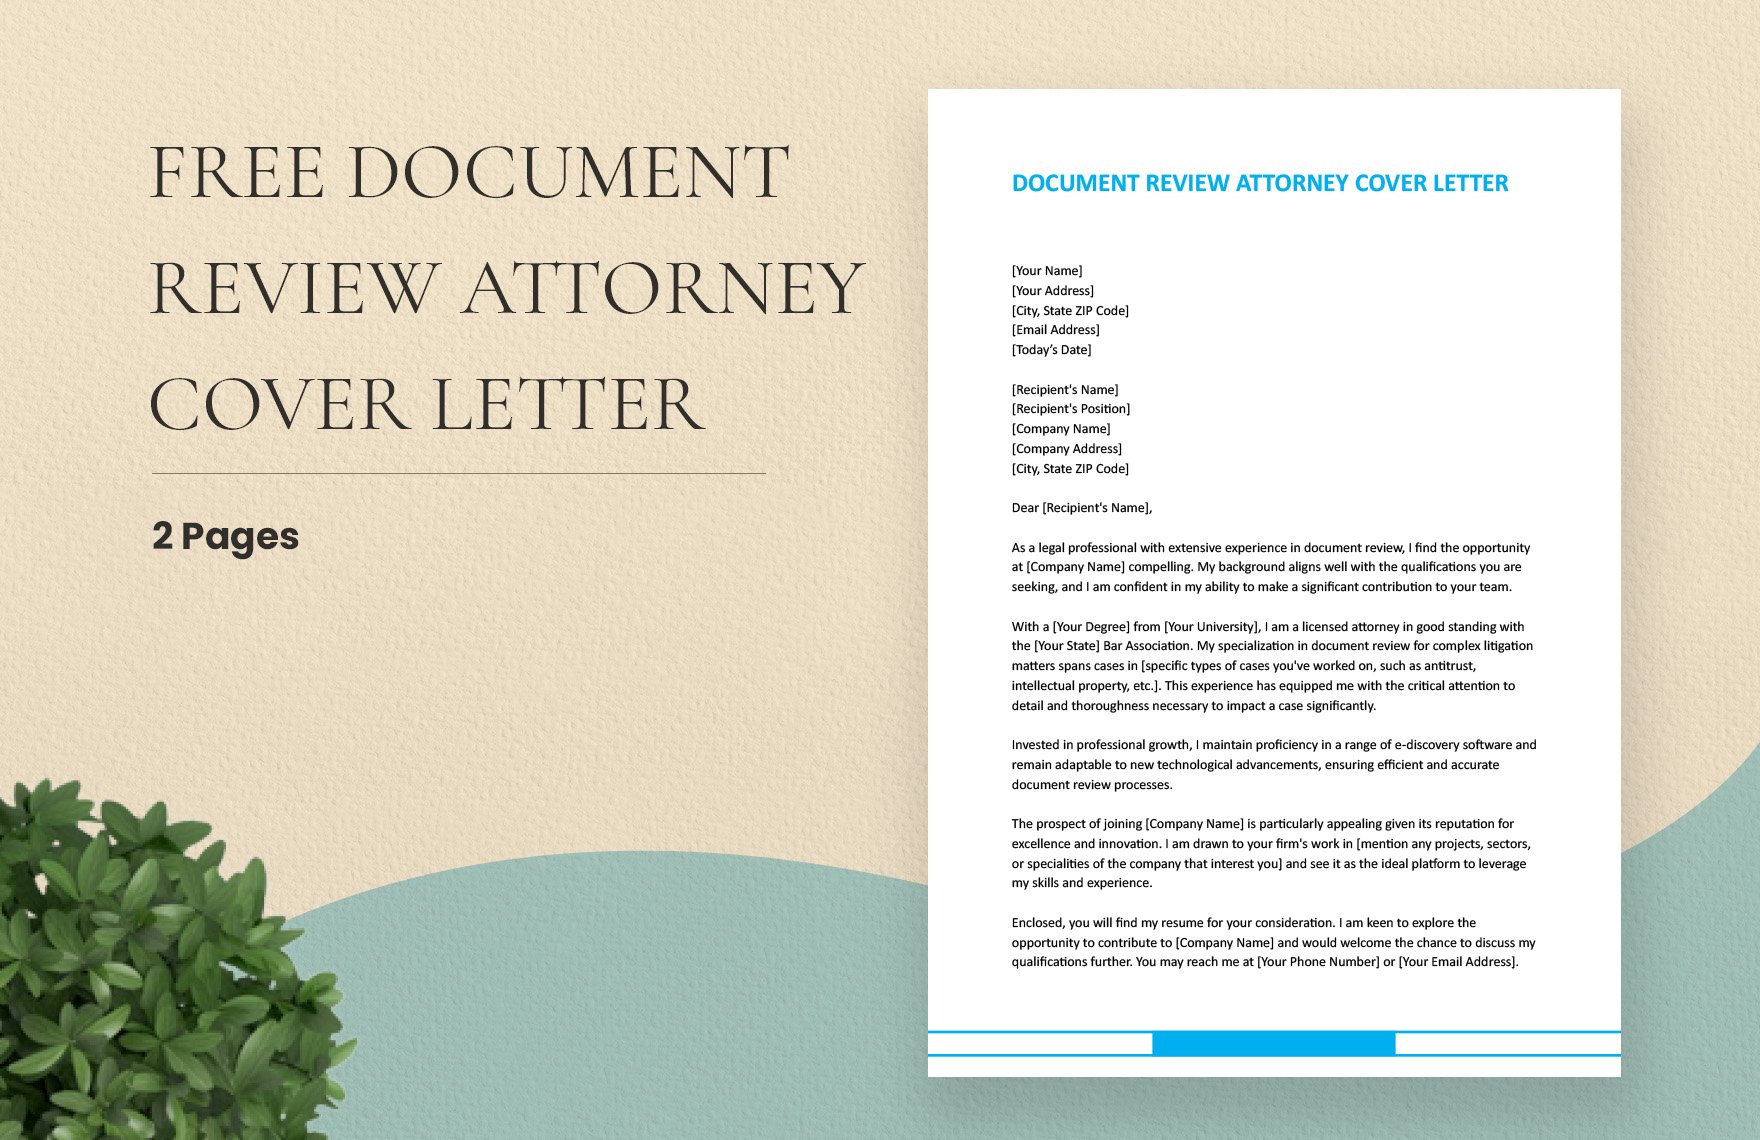 Document Review Attorney Cover Letter